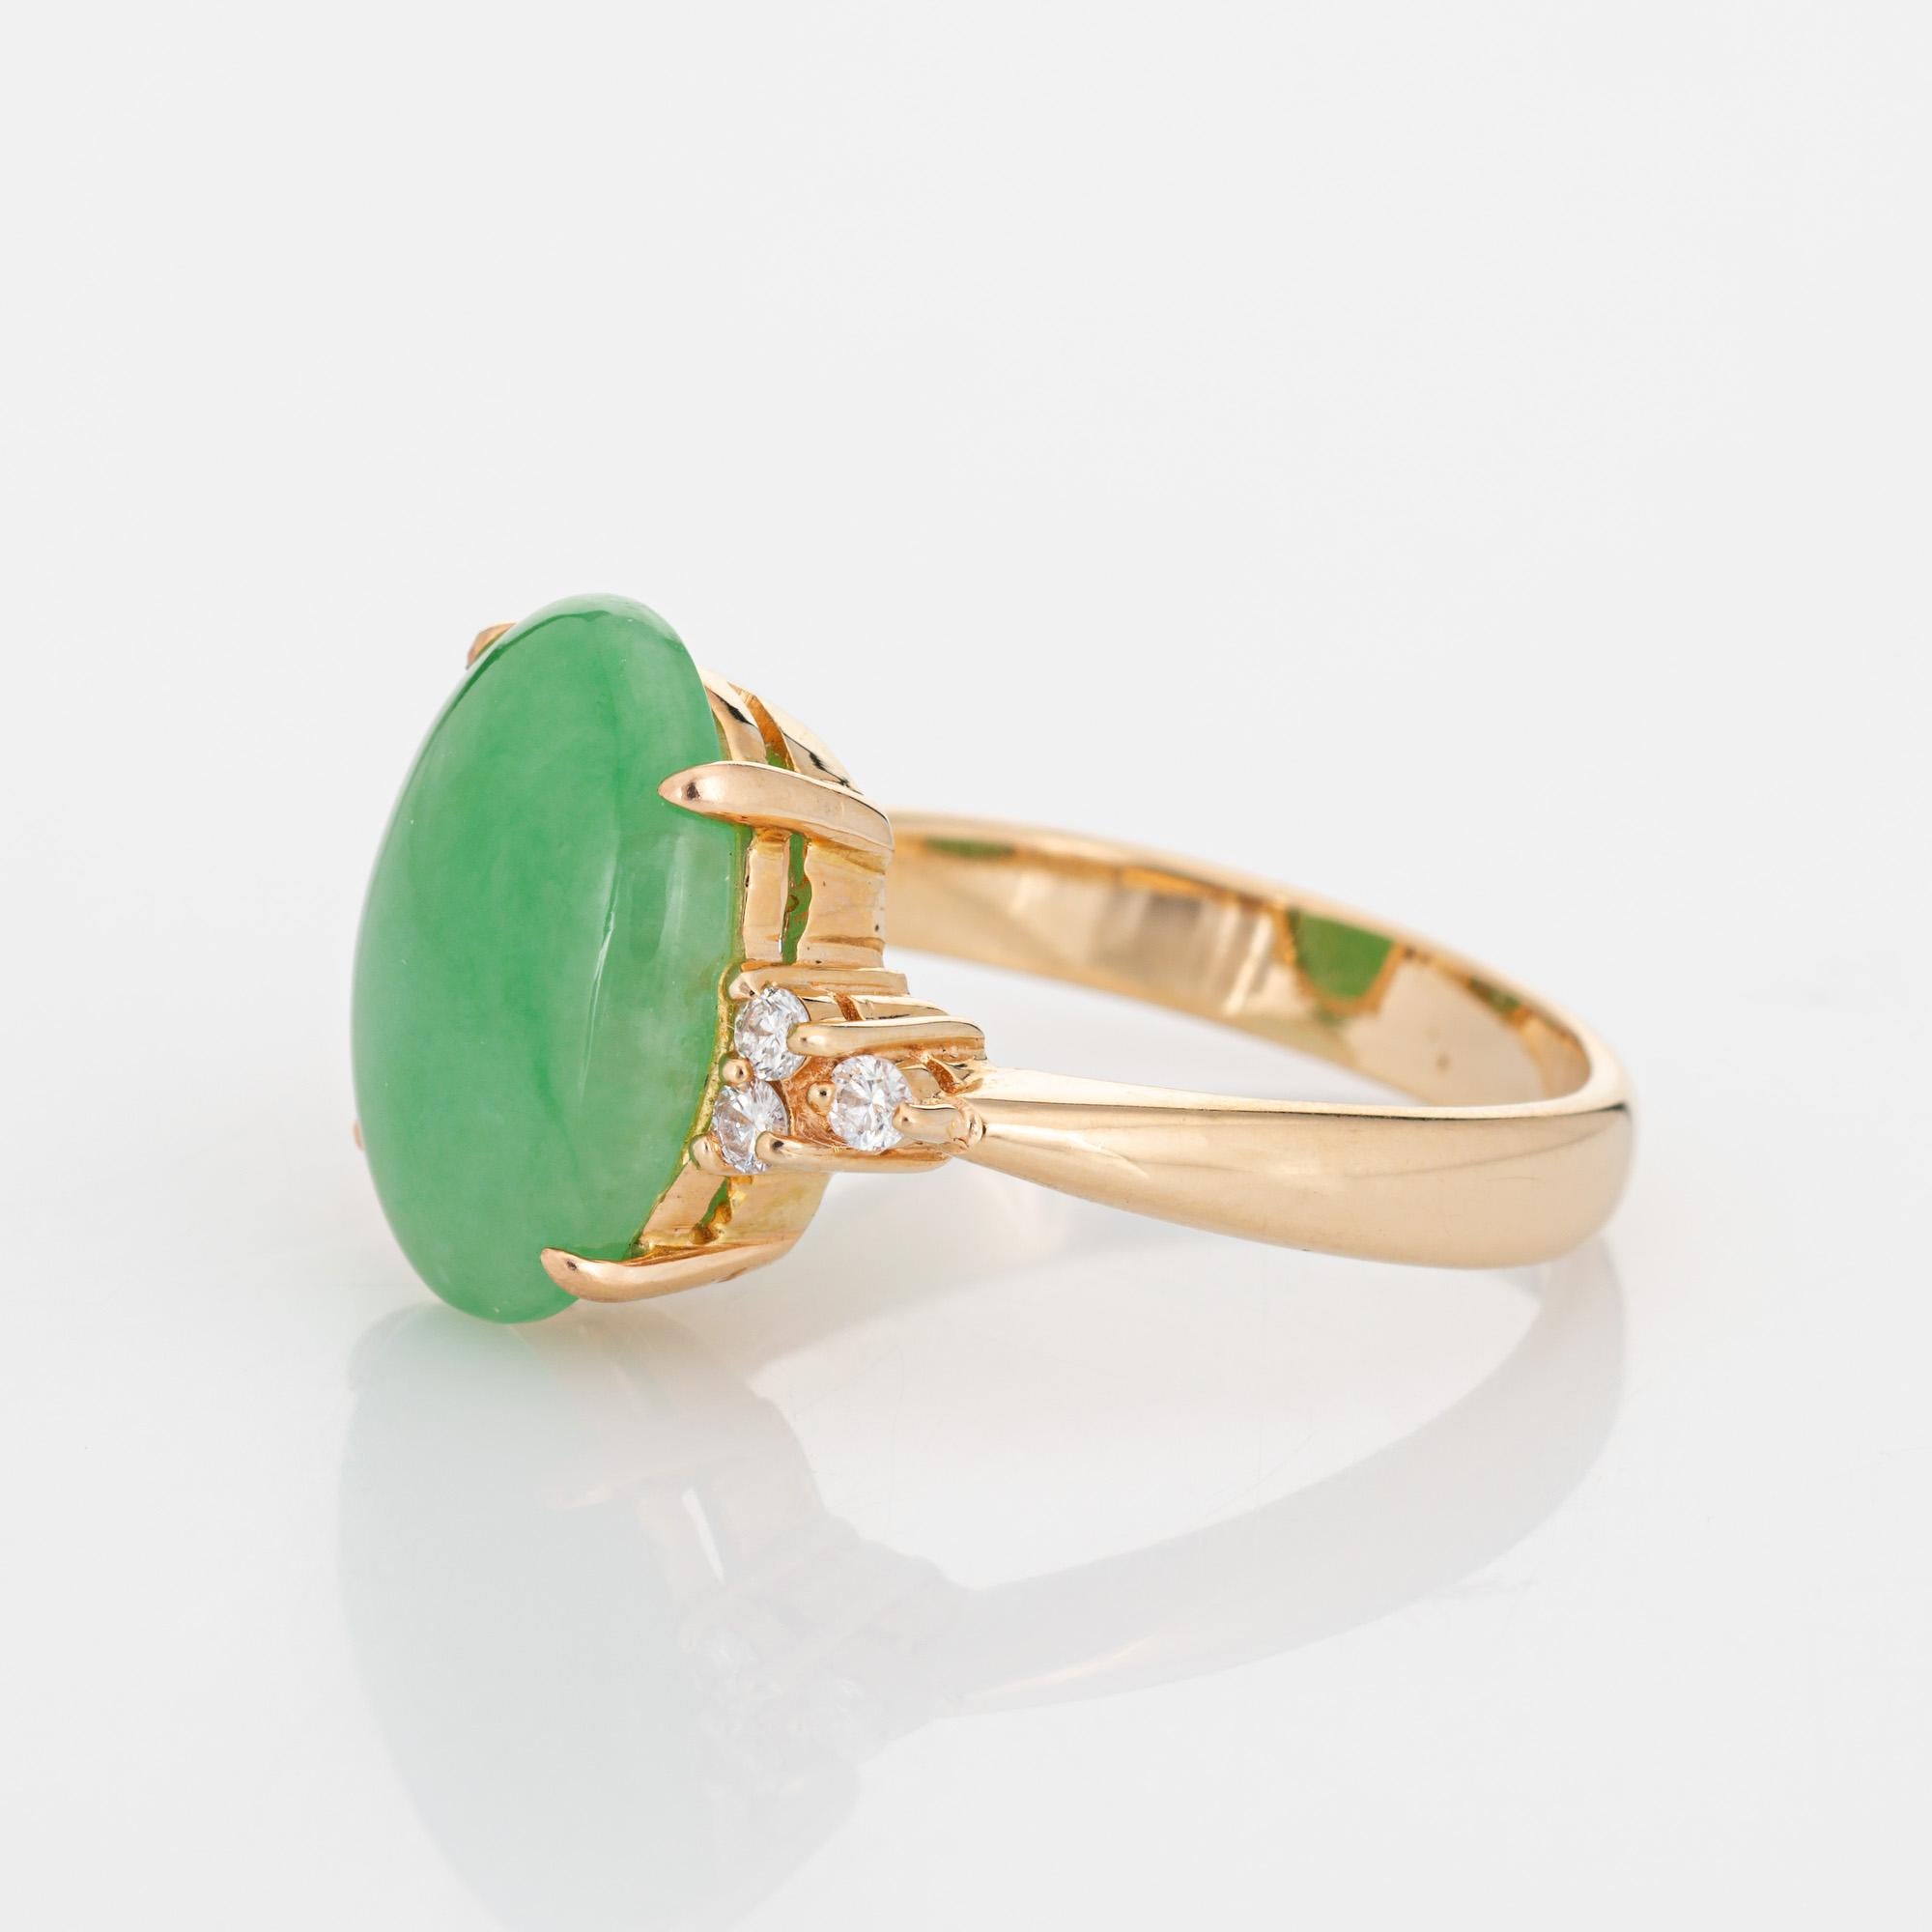 Oval Cut Jade Ring Vintage 14k Yellow Gold Jadeite Mid Century Cocktail Fine Jewelry 6.75 For Sale